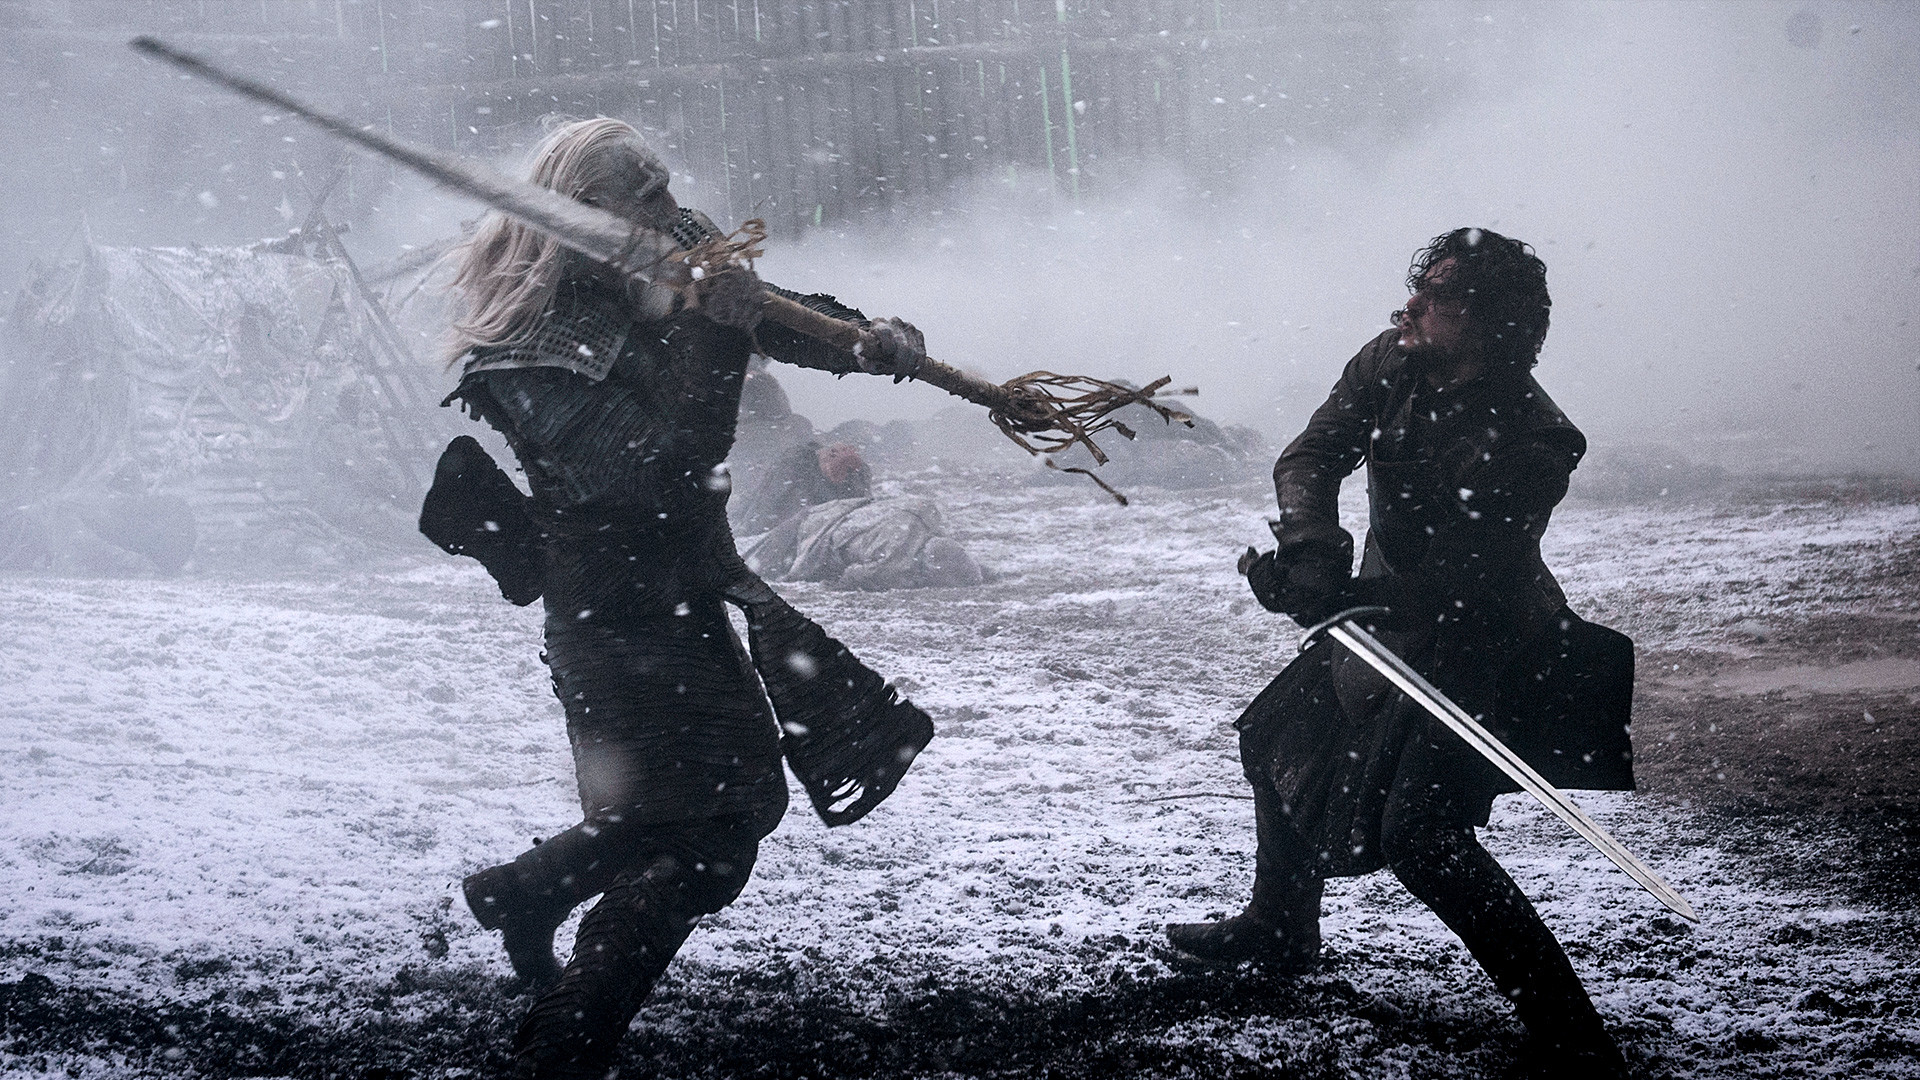 1920x1080 4 Major Battles That Might Take Place In Game of Thrones Season 8